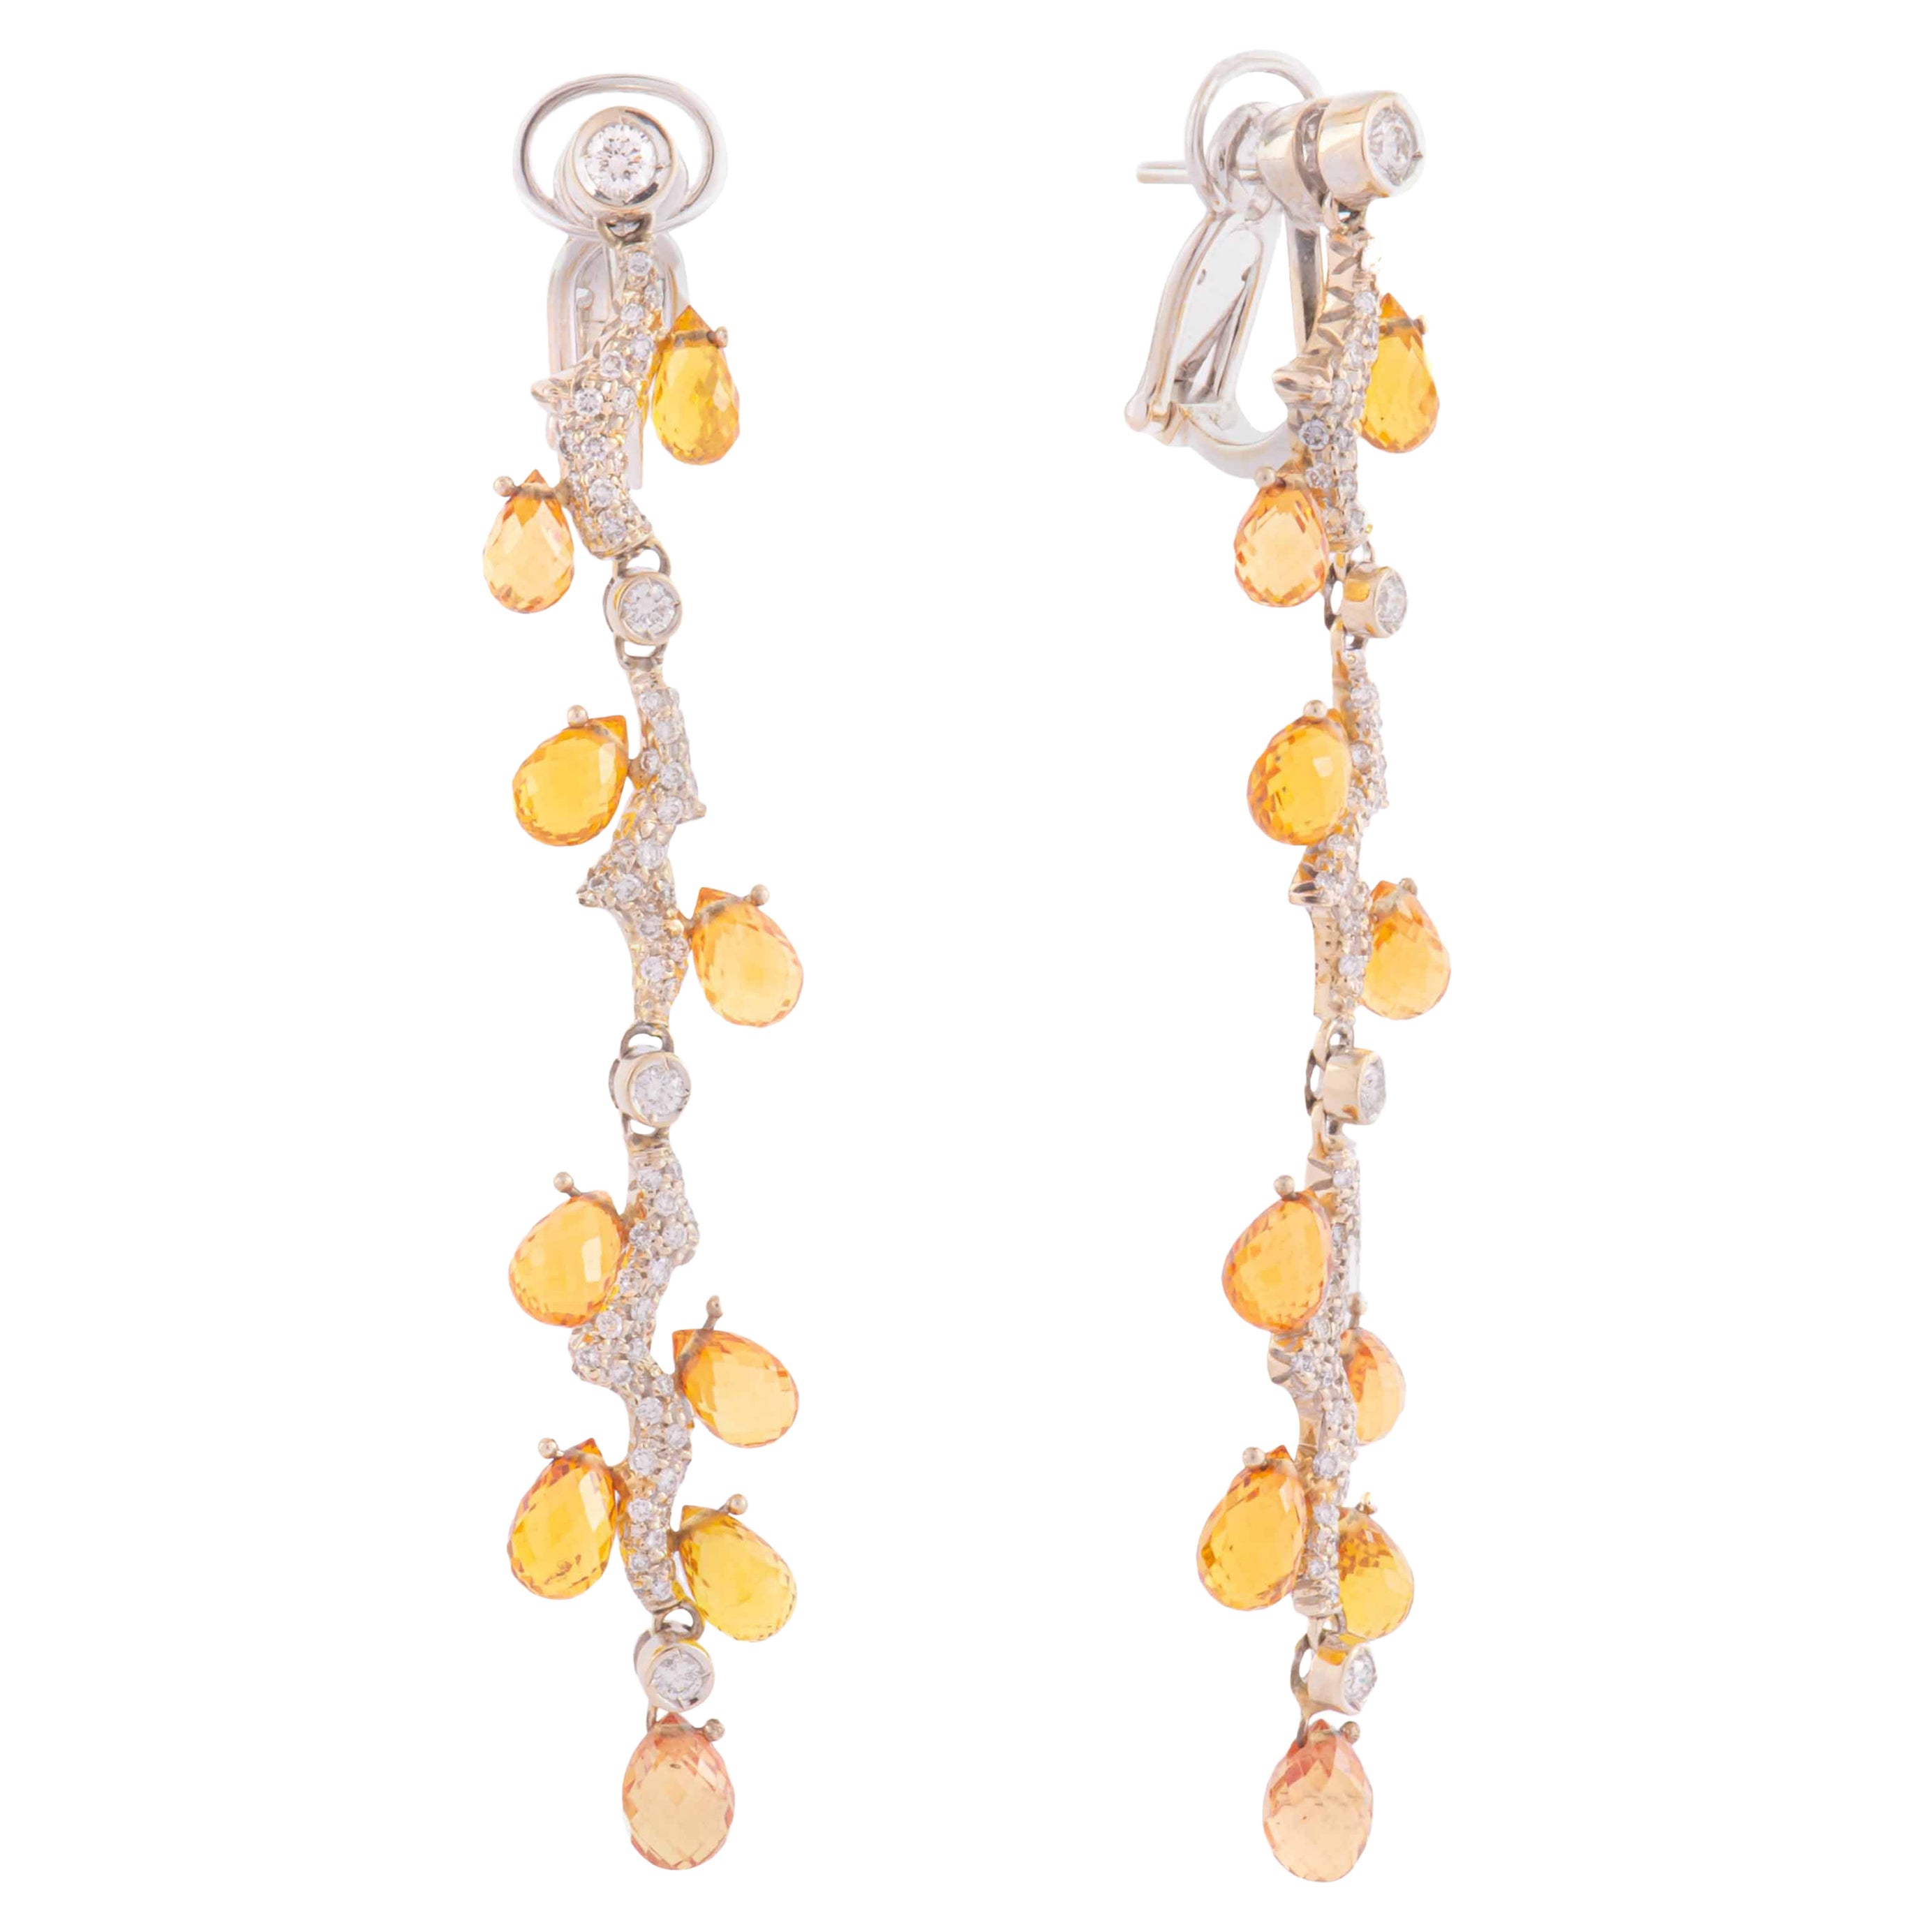 Carlo Luca Della Quercia Earrings in White Gold, Diamonds and Yellow Sapphires